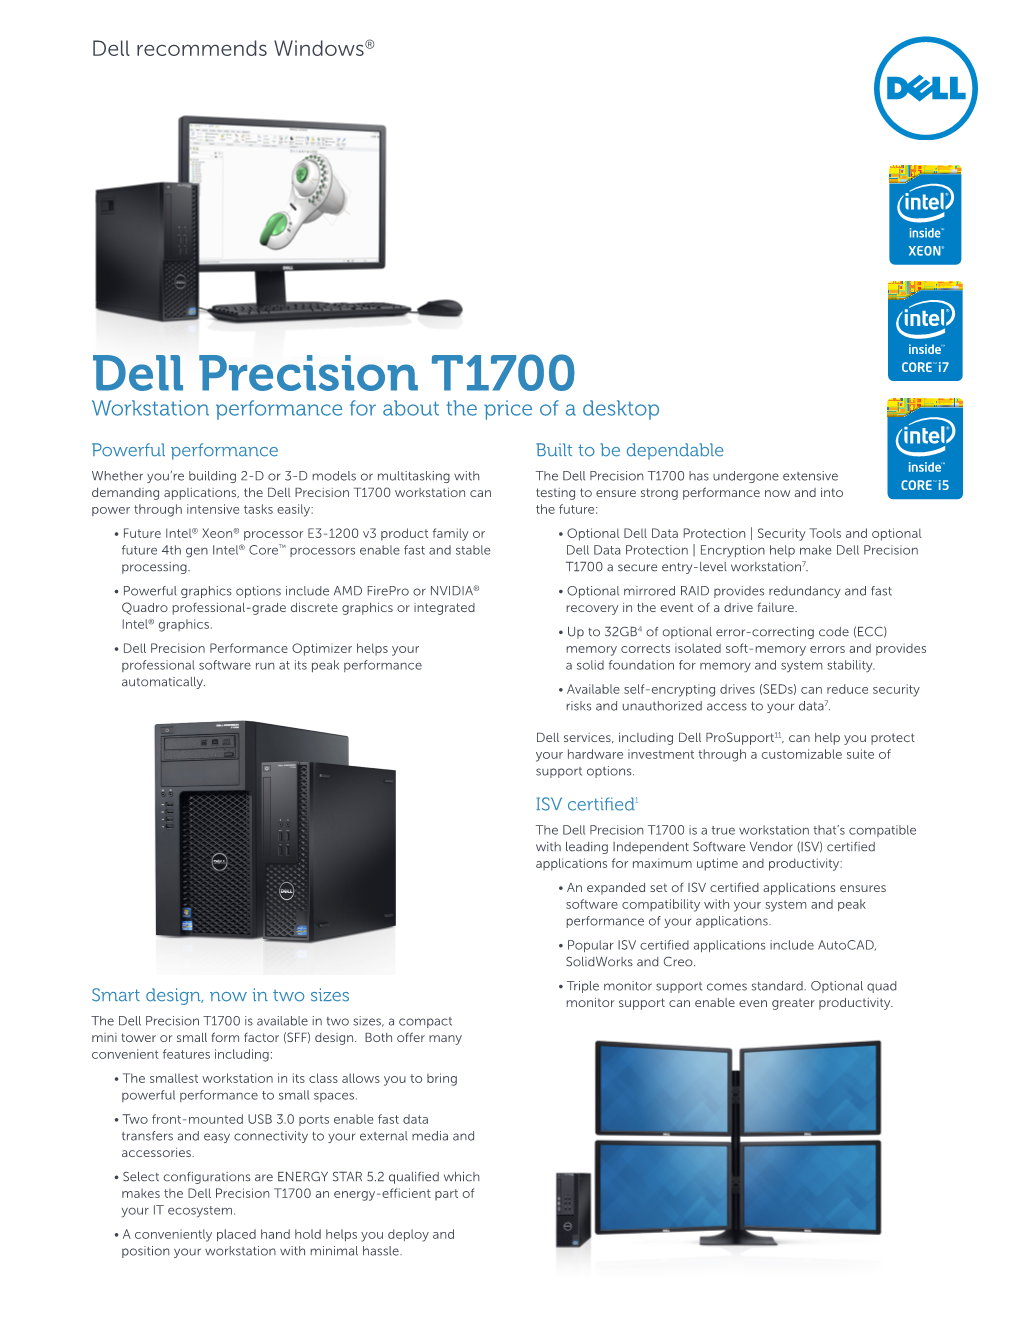 Dell Precision T1700 Workstation Performance for About the Price of a Desktop